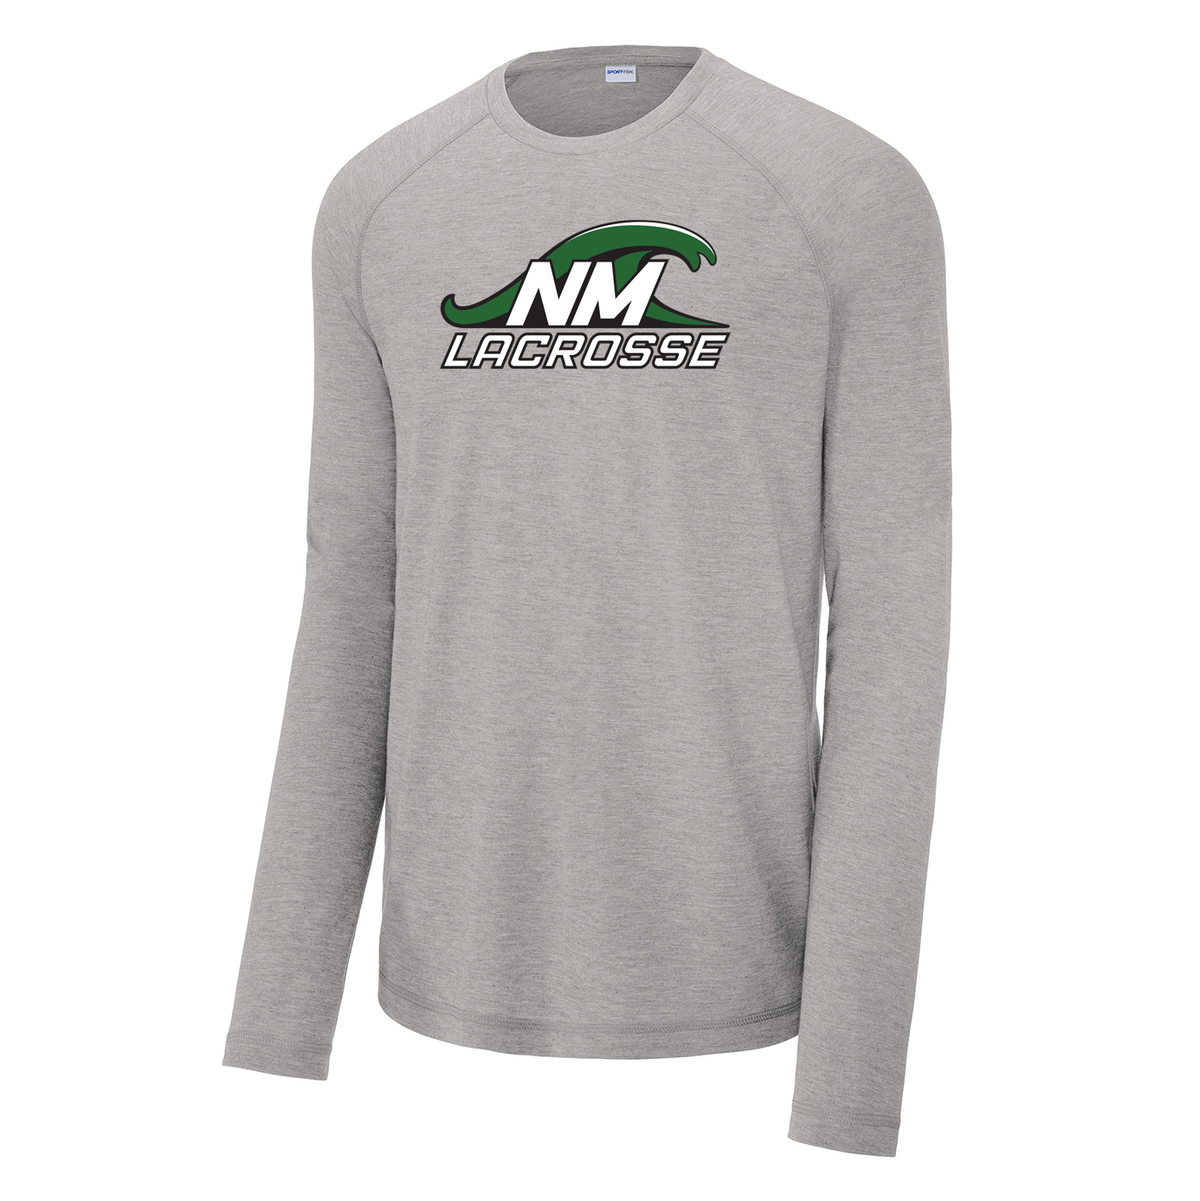 New Milford Youth Lacrosse Long Sleeve Raglan CottonTouch